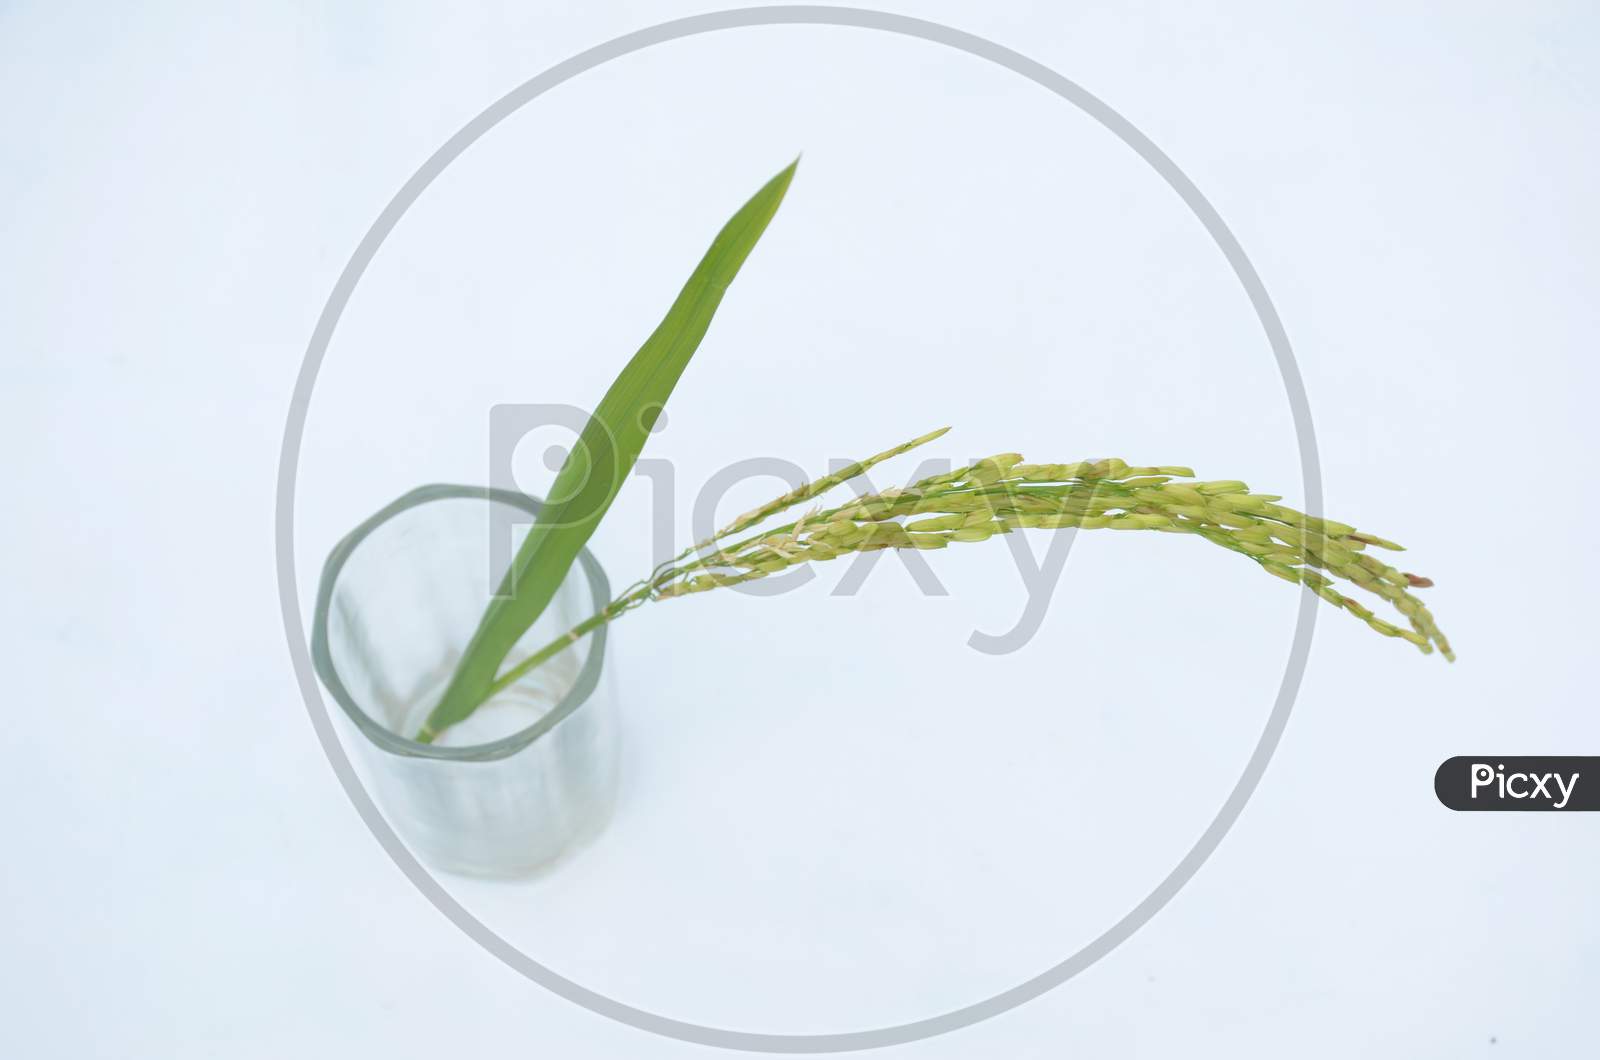 The Green Ripe Paddy Plant Grains In The Glass Isolated On White Background.